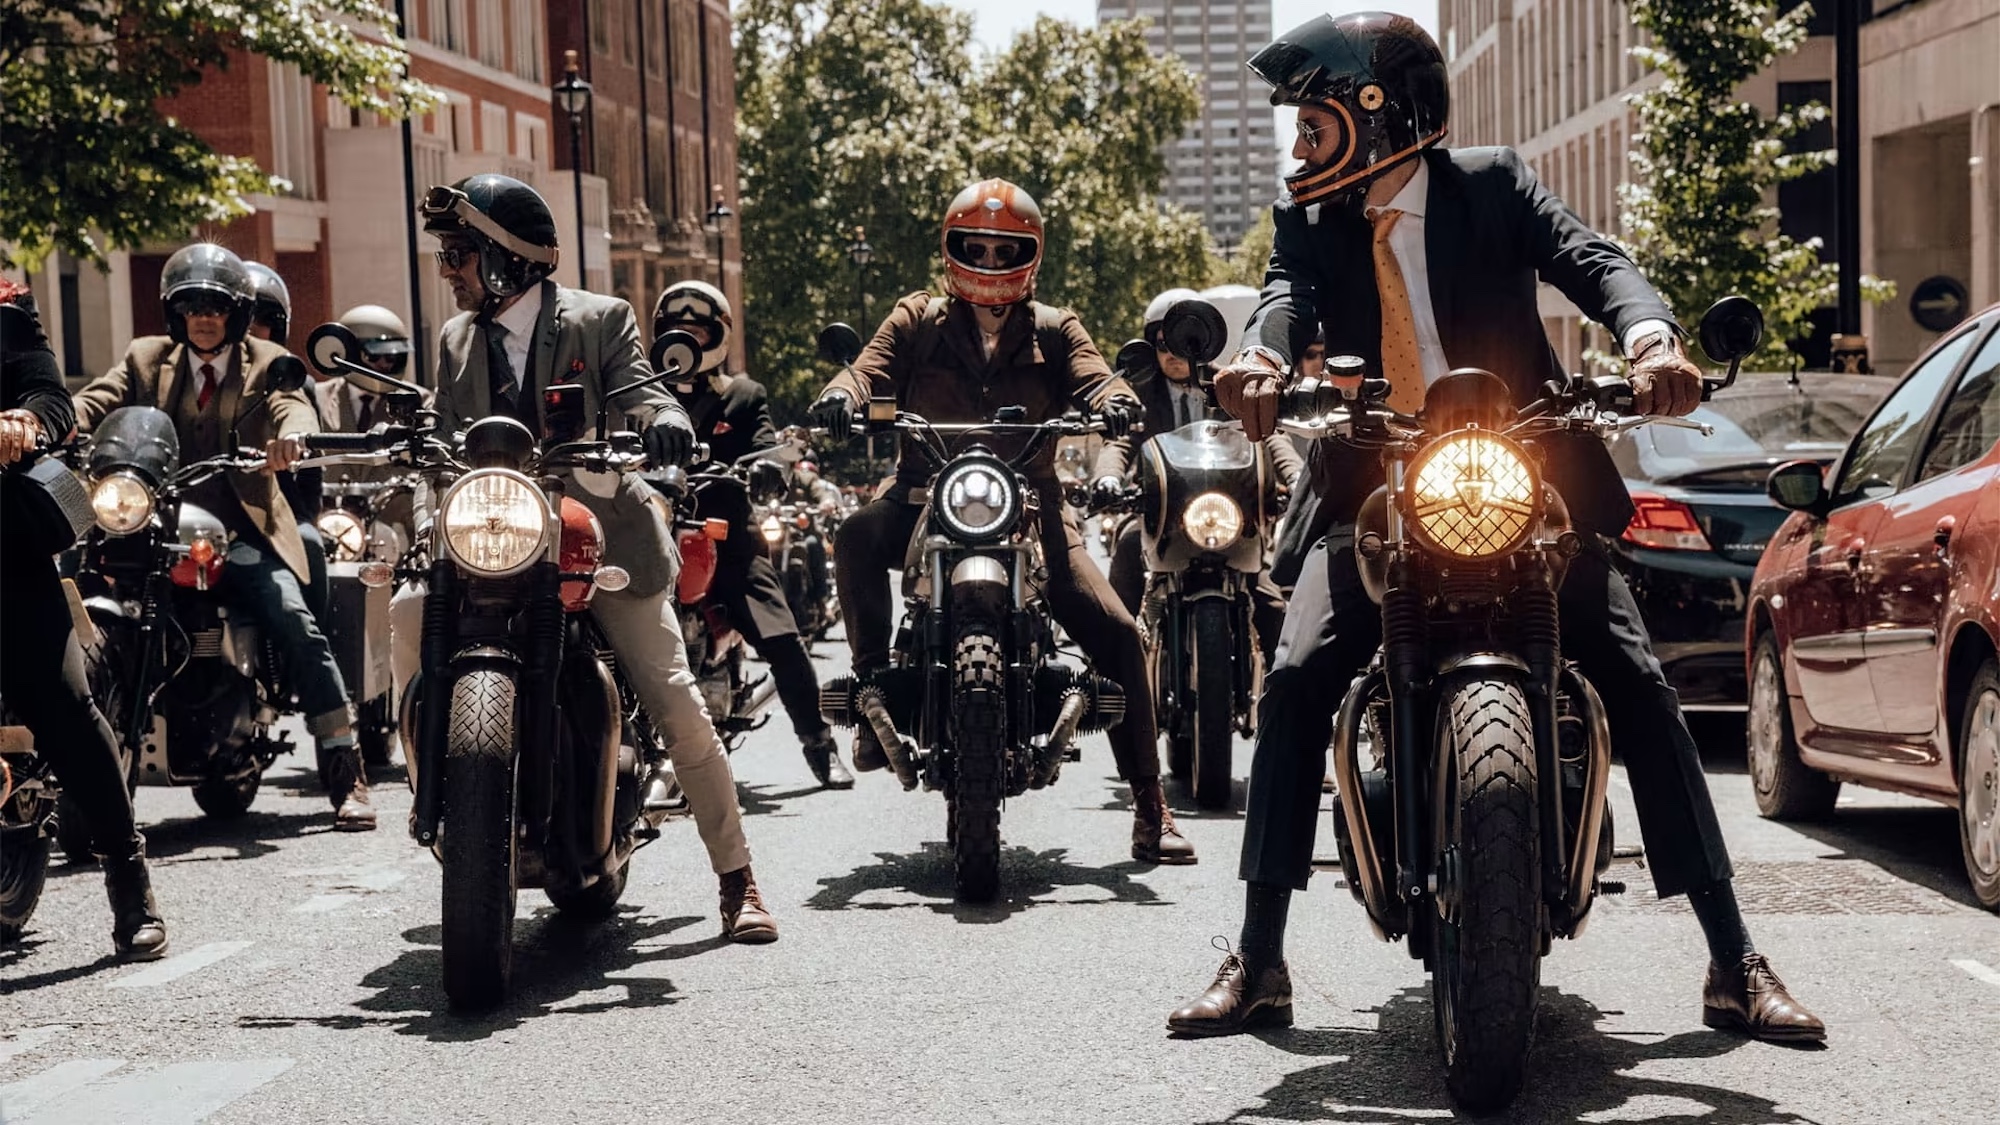 a bunch of motorcyclists on vintage and classic motorcycles.